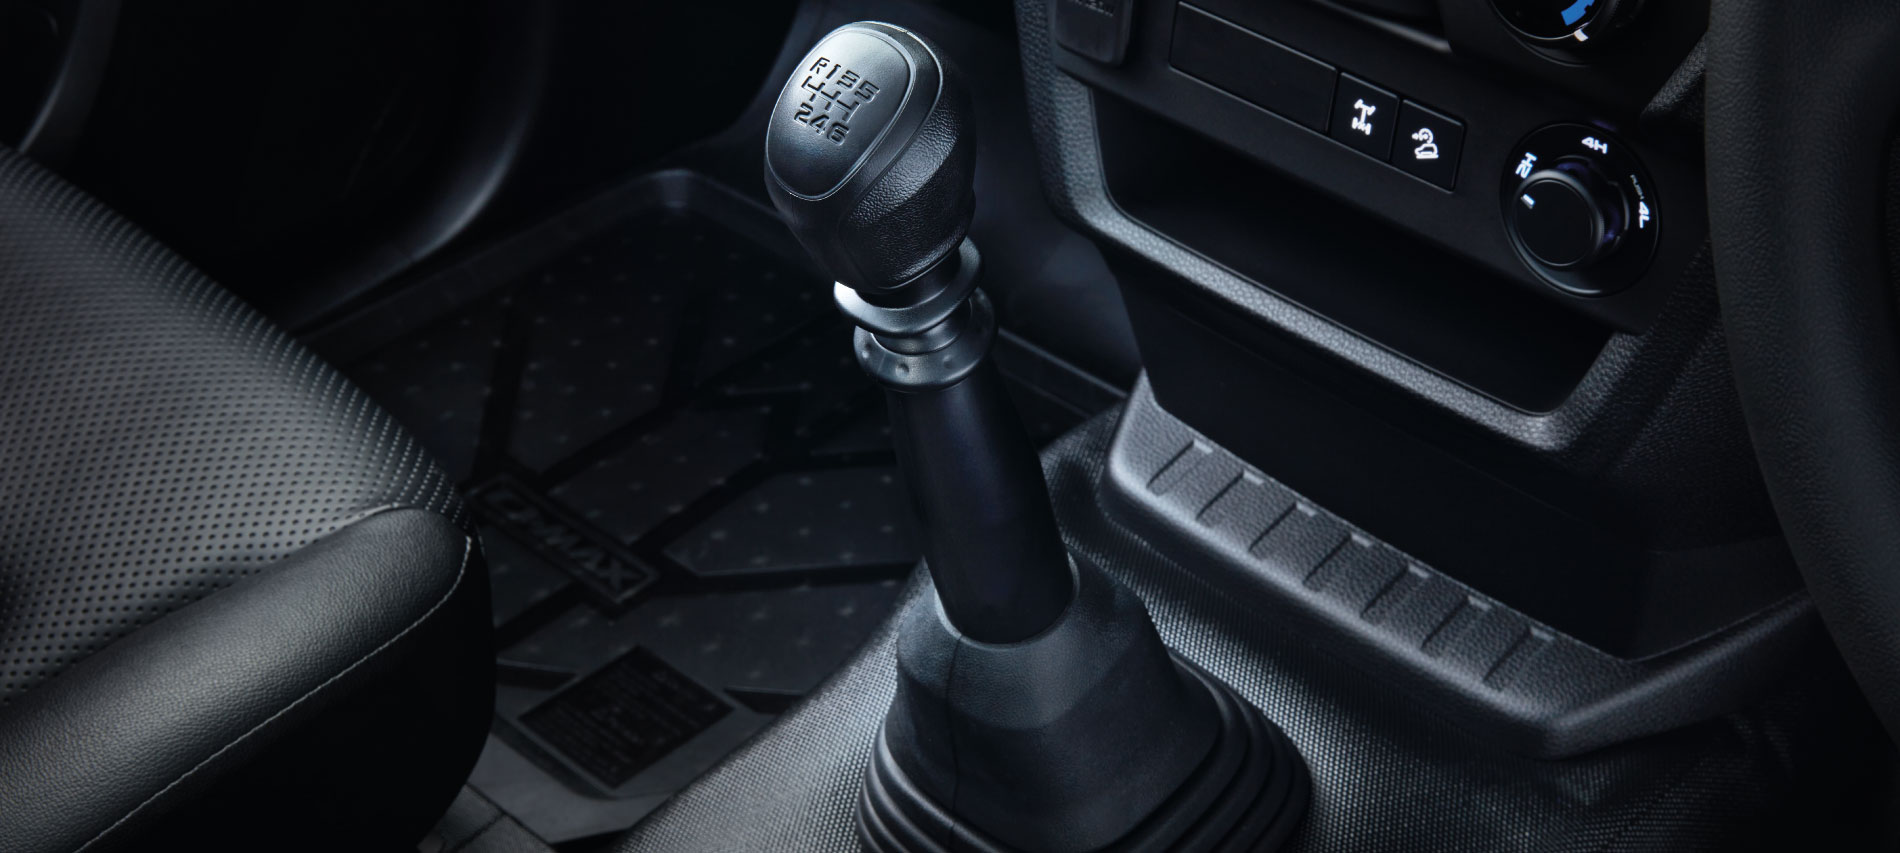 6-SPEED MANUAL WITH GEAR SHIFT INDICATOR (GSI)